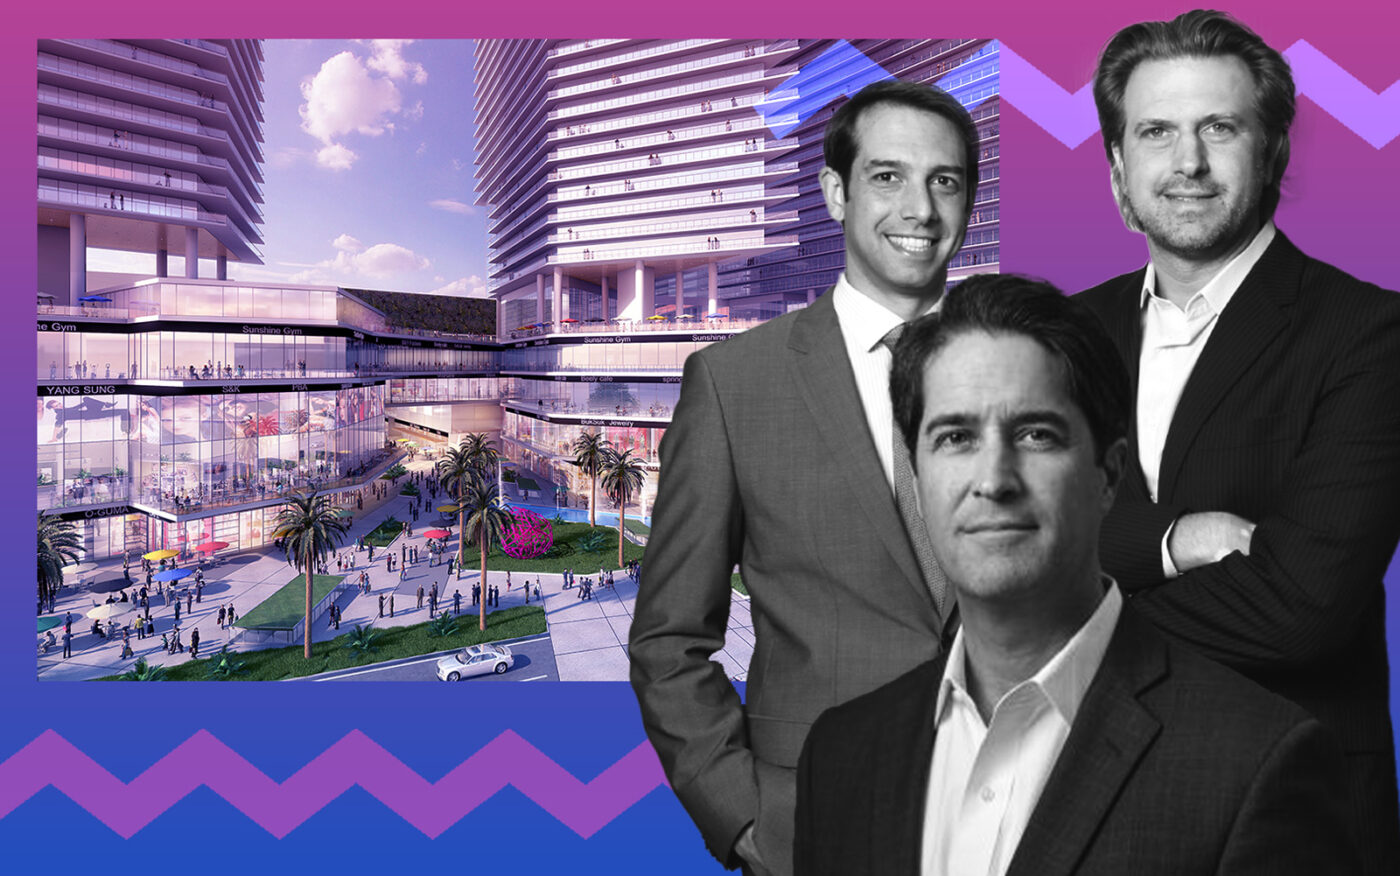 Stiles Transfers Density to Melo for Downtown Miami Project